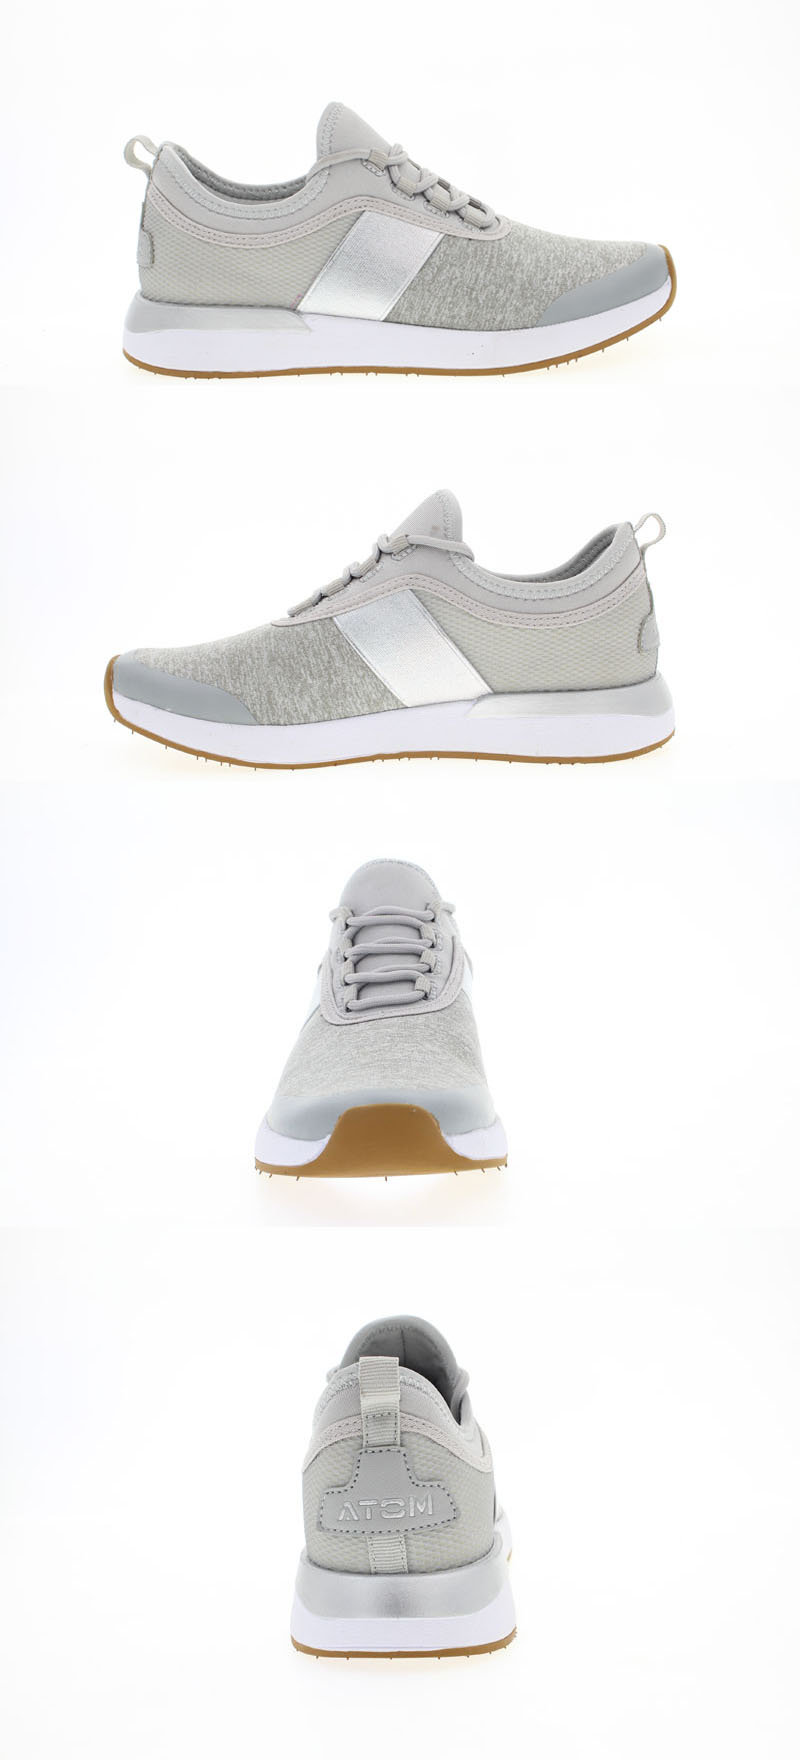 Light grey system shoes